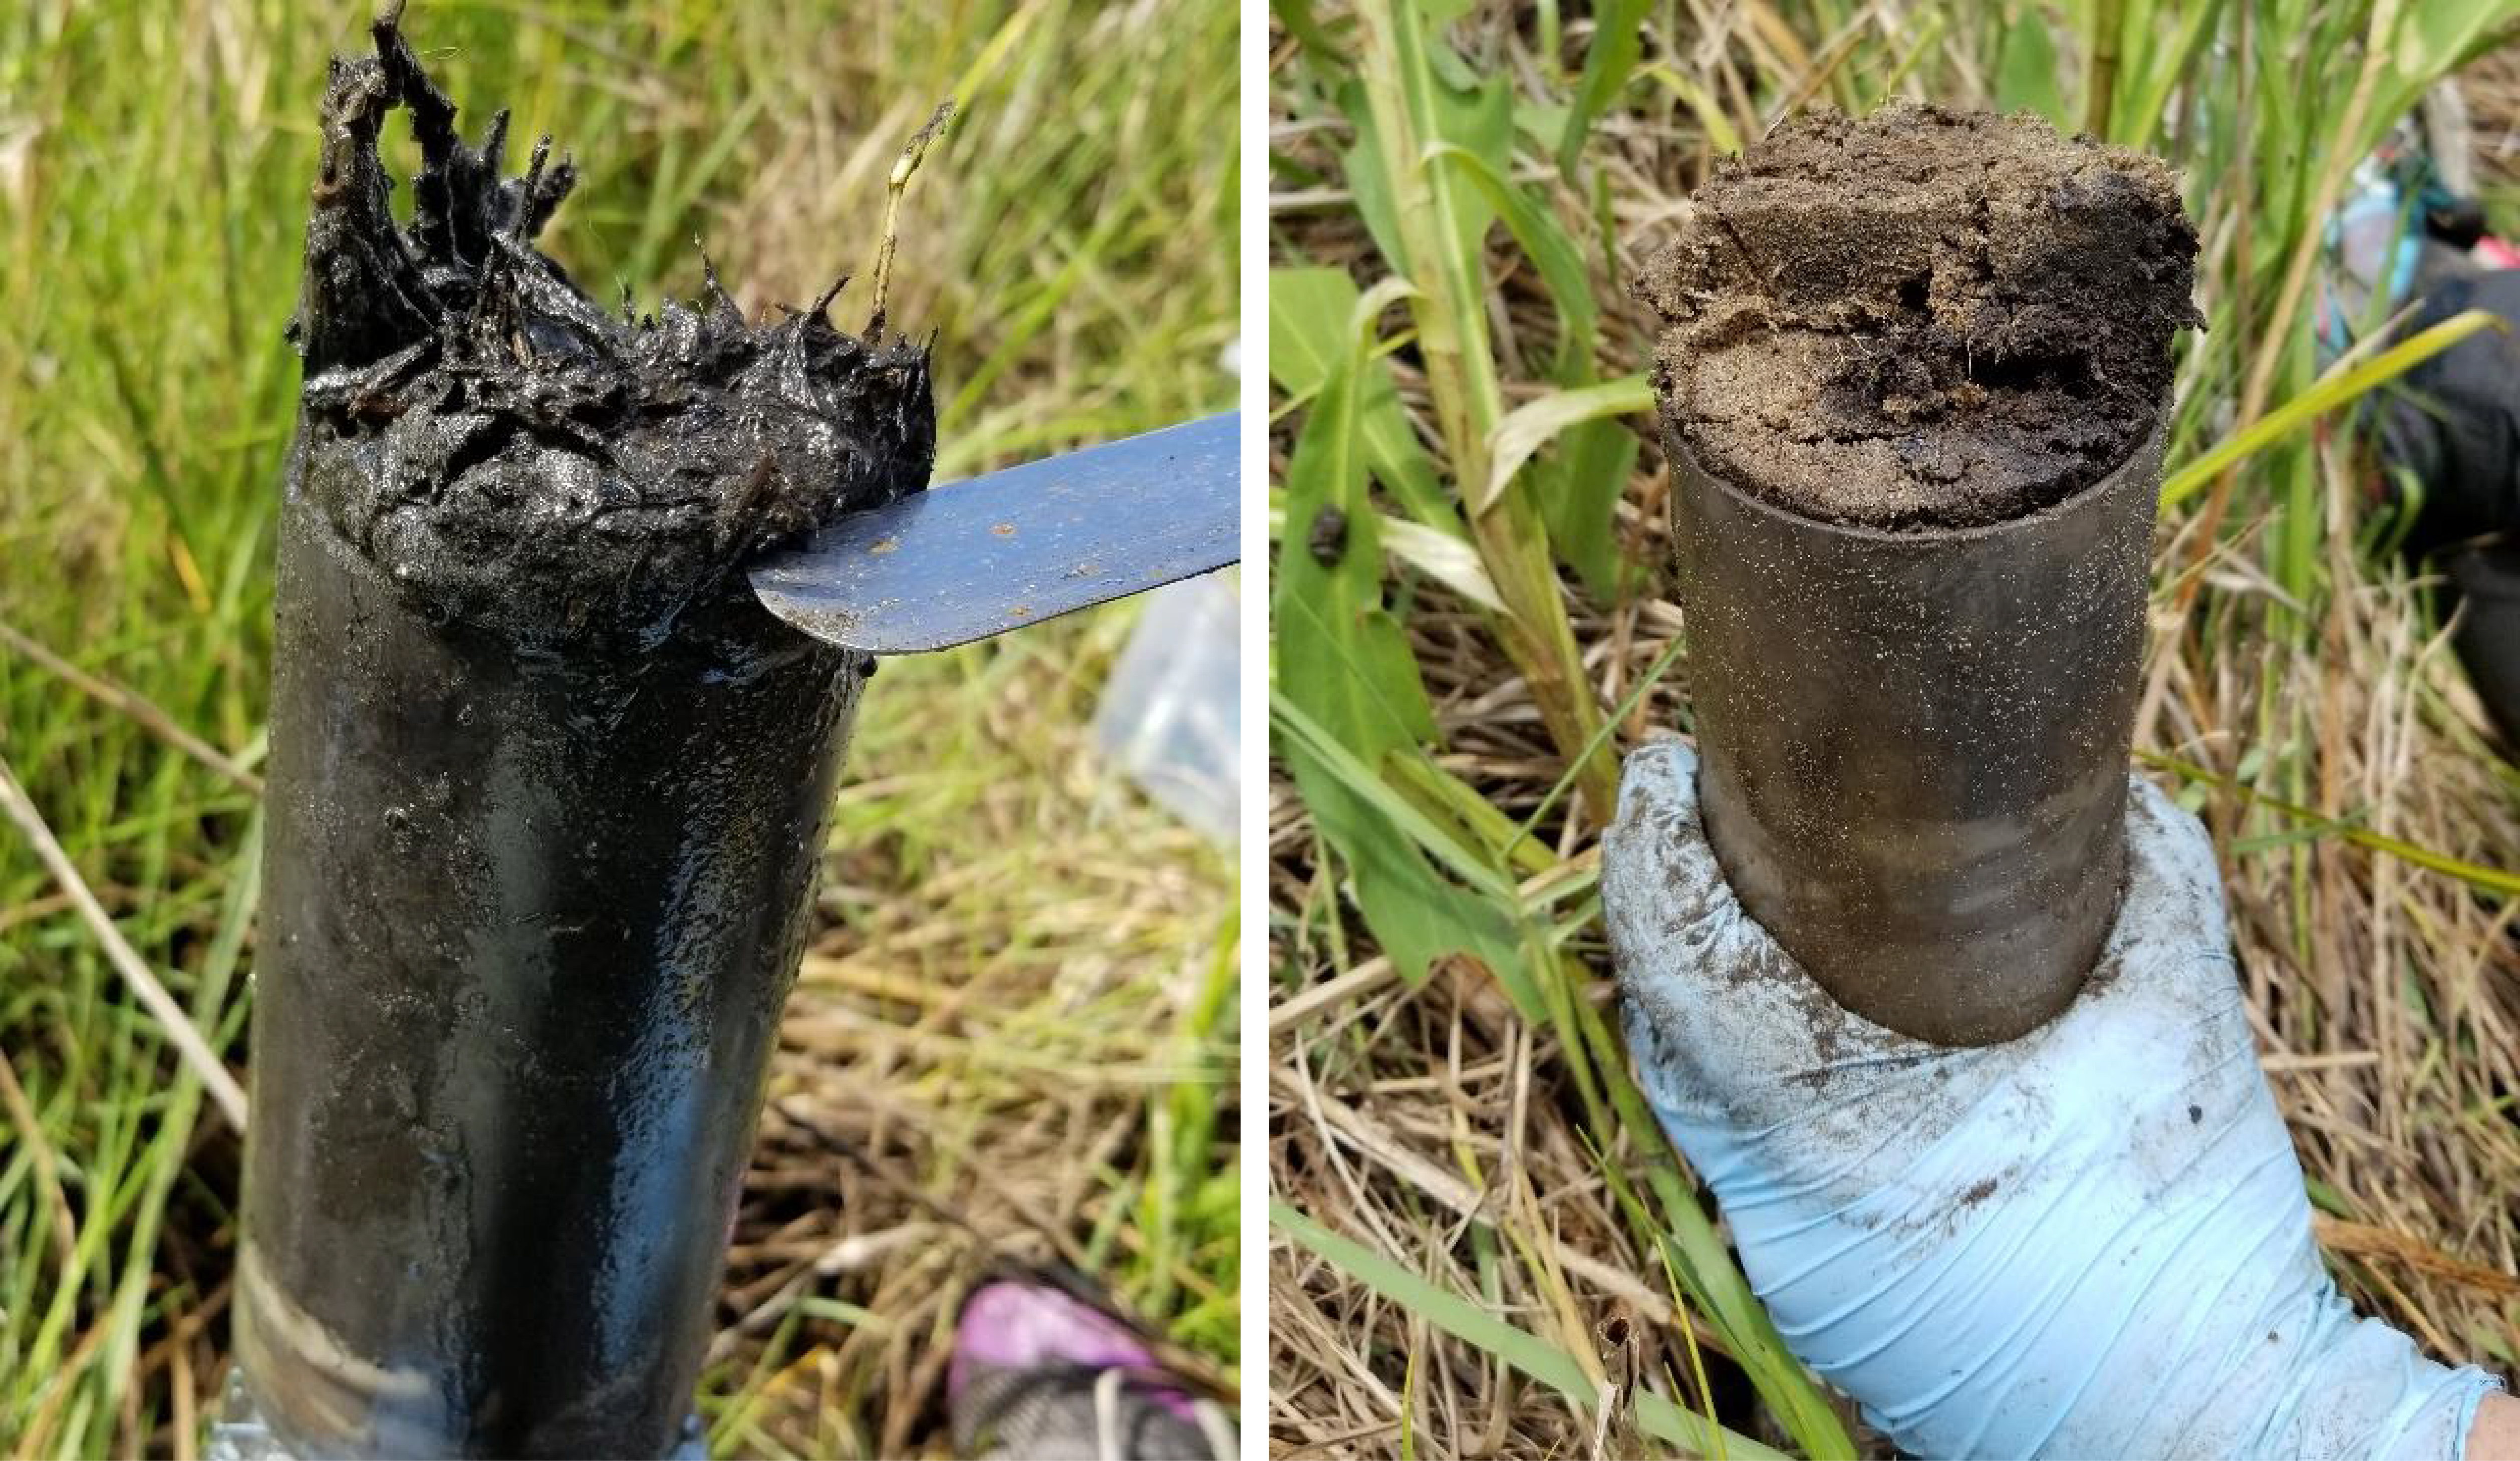 Sediment core collections. Left: from sandy dredge deposits at Lake Hermitage marsh creation site. Right: organic, mud rich sediments from natural marshes. Credit: Annette Engel.